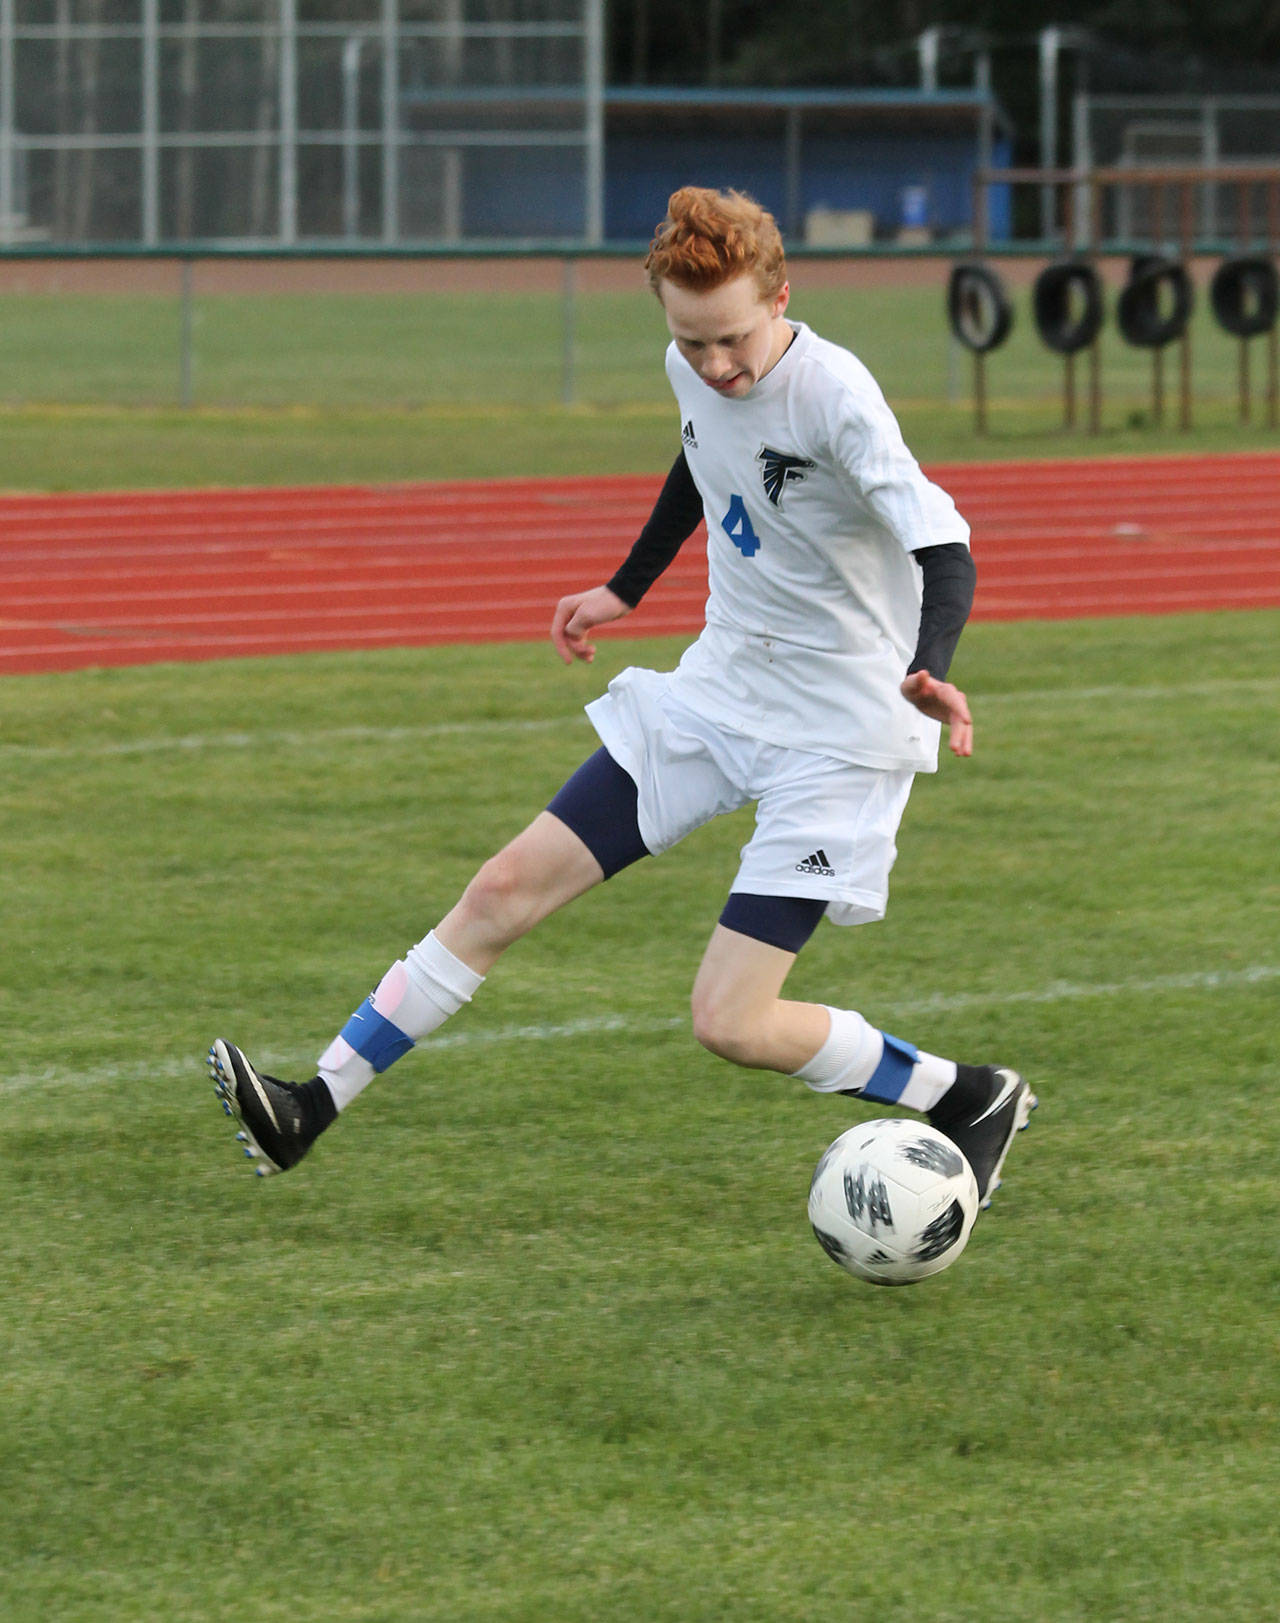 Reilly McVay runs down the ball for the Falcons in the King’s match Friday.(Photo by Jim Waller/Whidbey News Group)